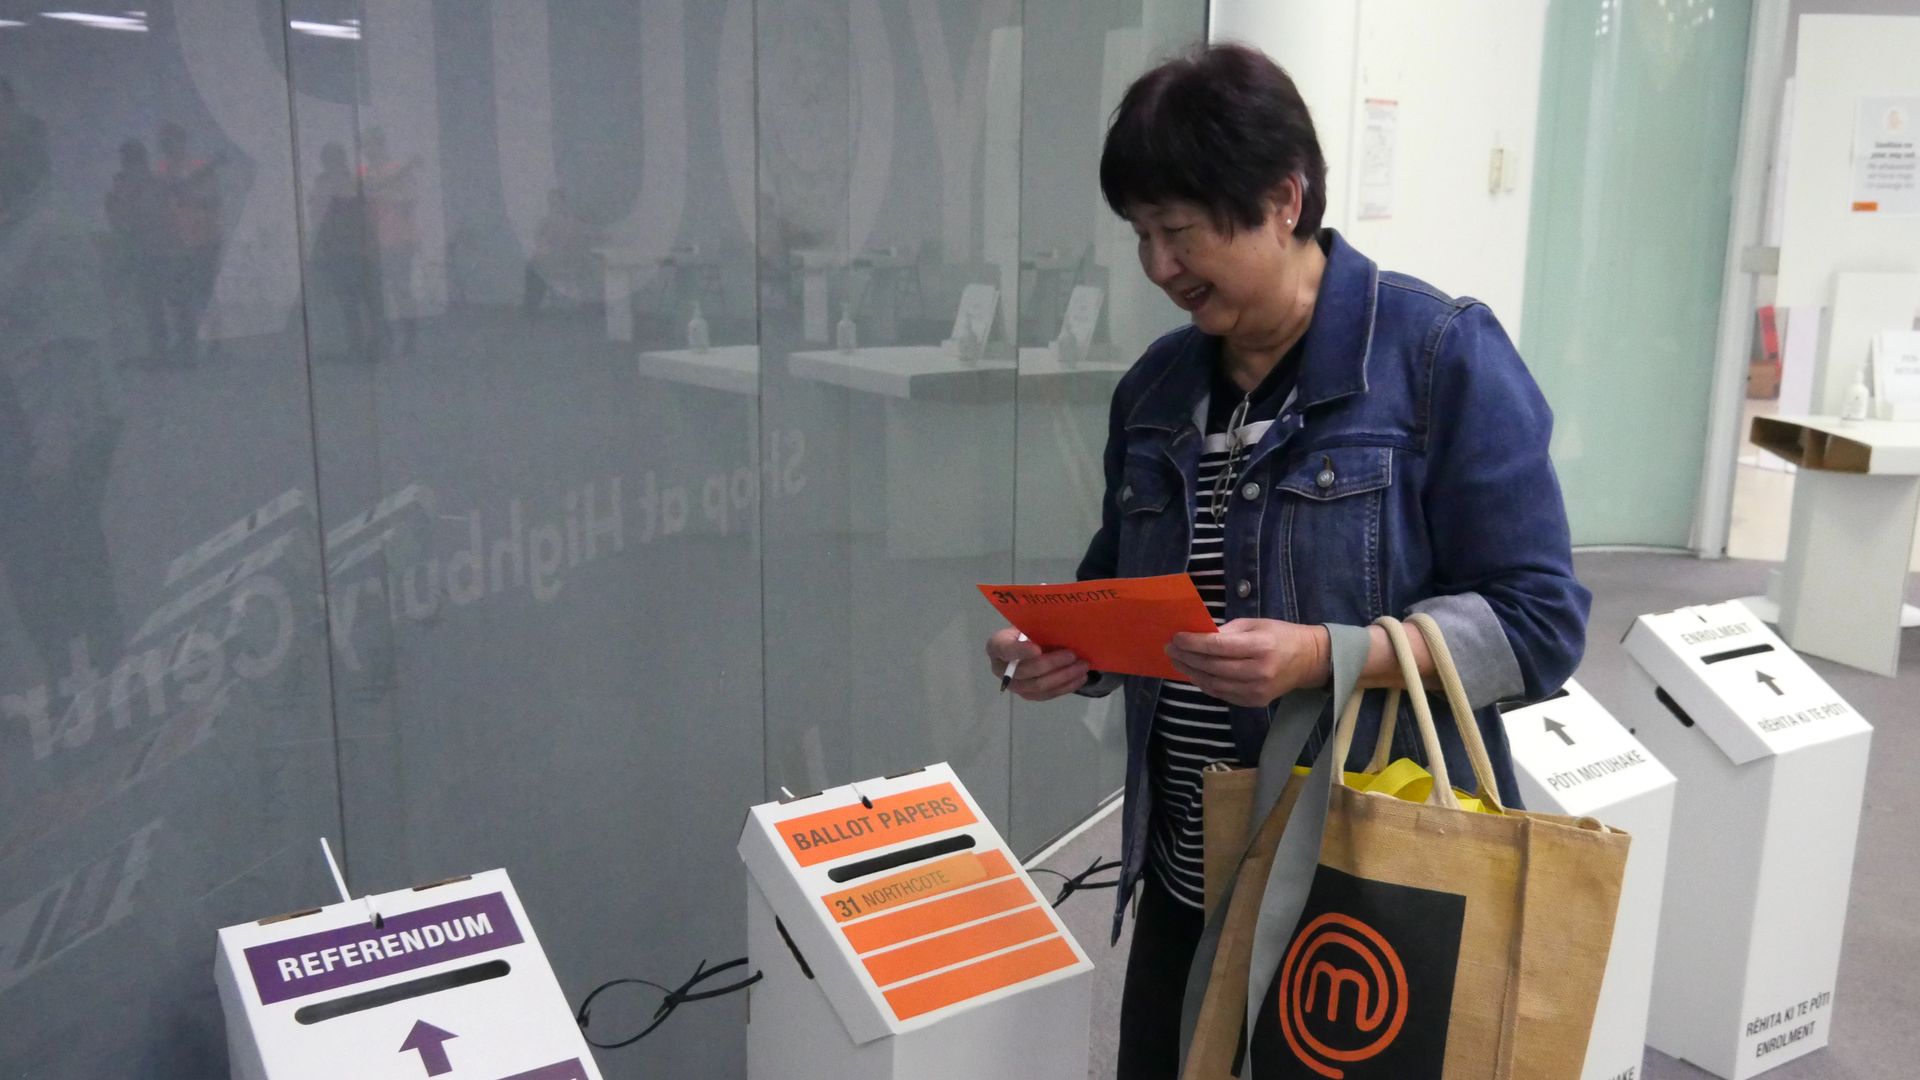 A voter casts her referendum and election ballots in Auckland, New Zealand.